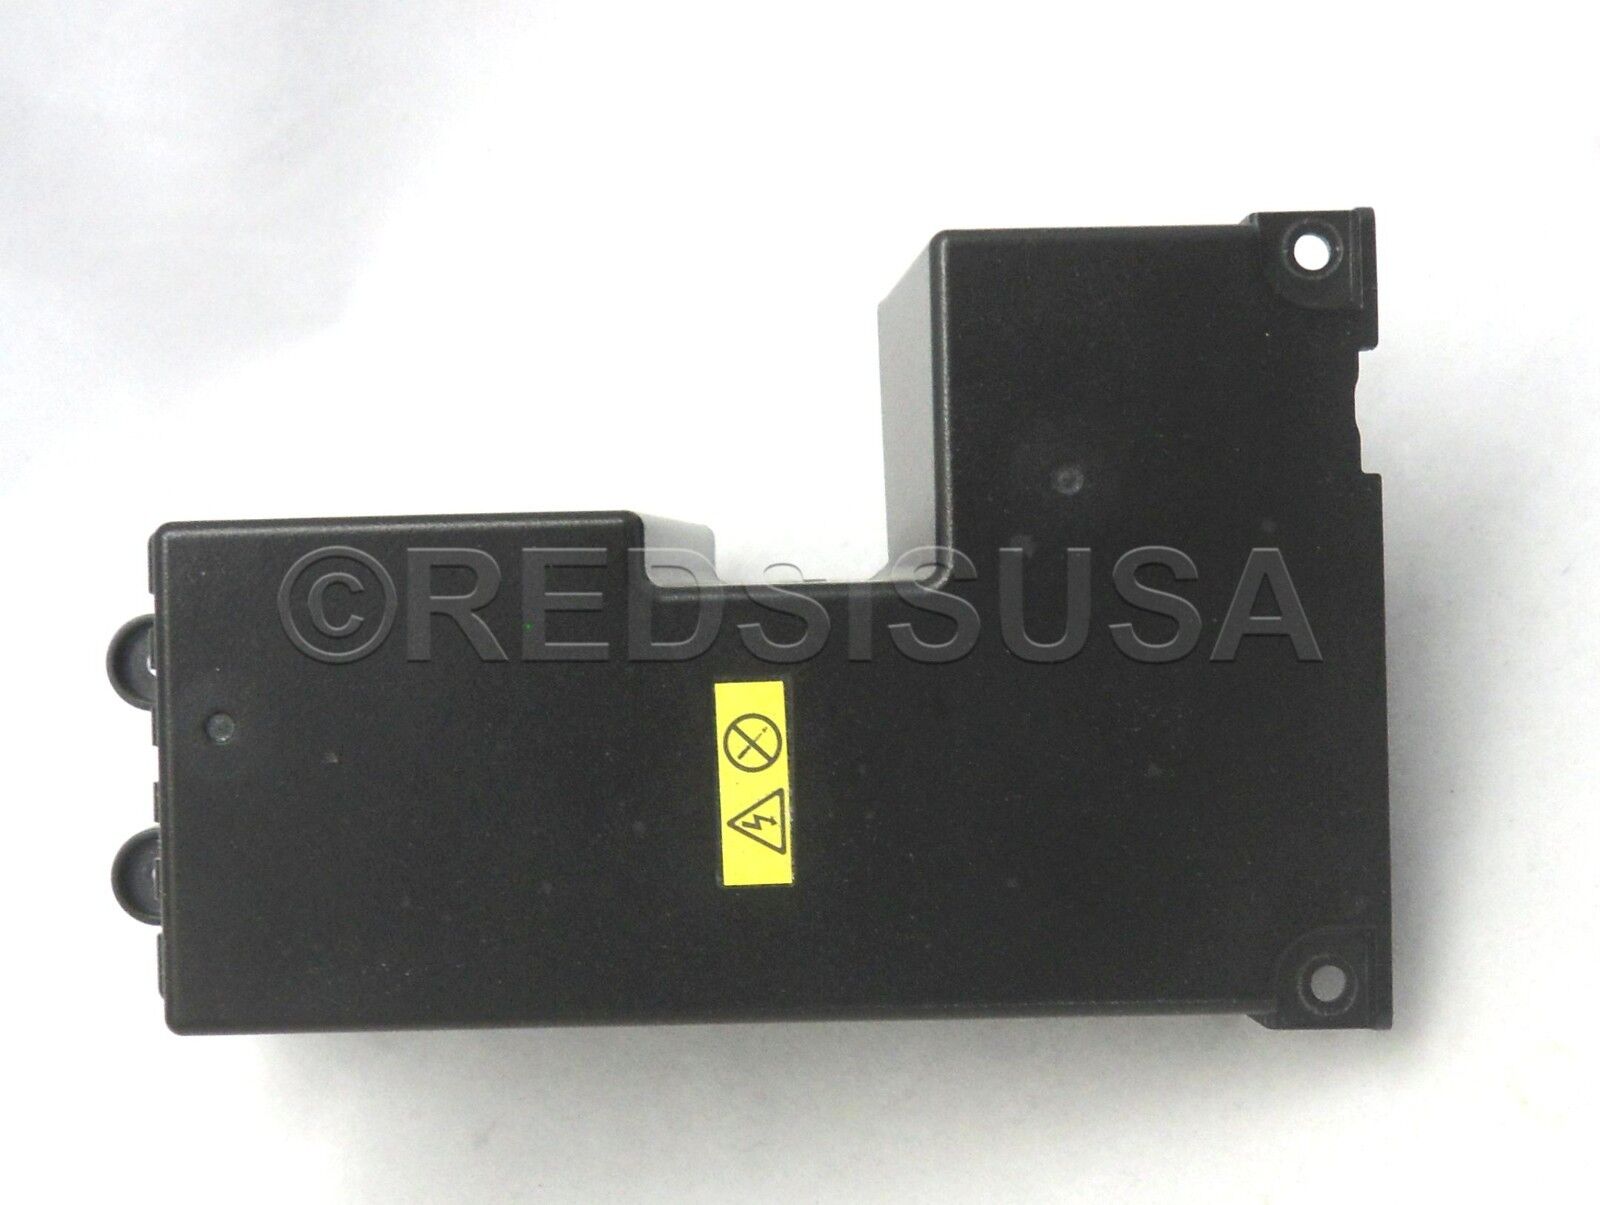 IBM 240VA cover Paddle card safety cover for X3630 M4 00D8978C-3598